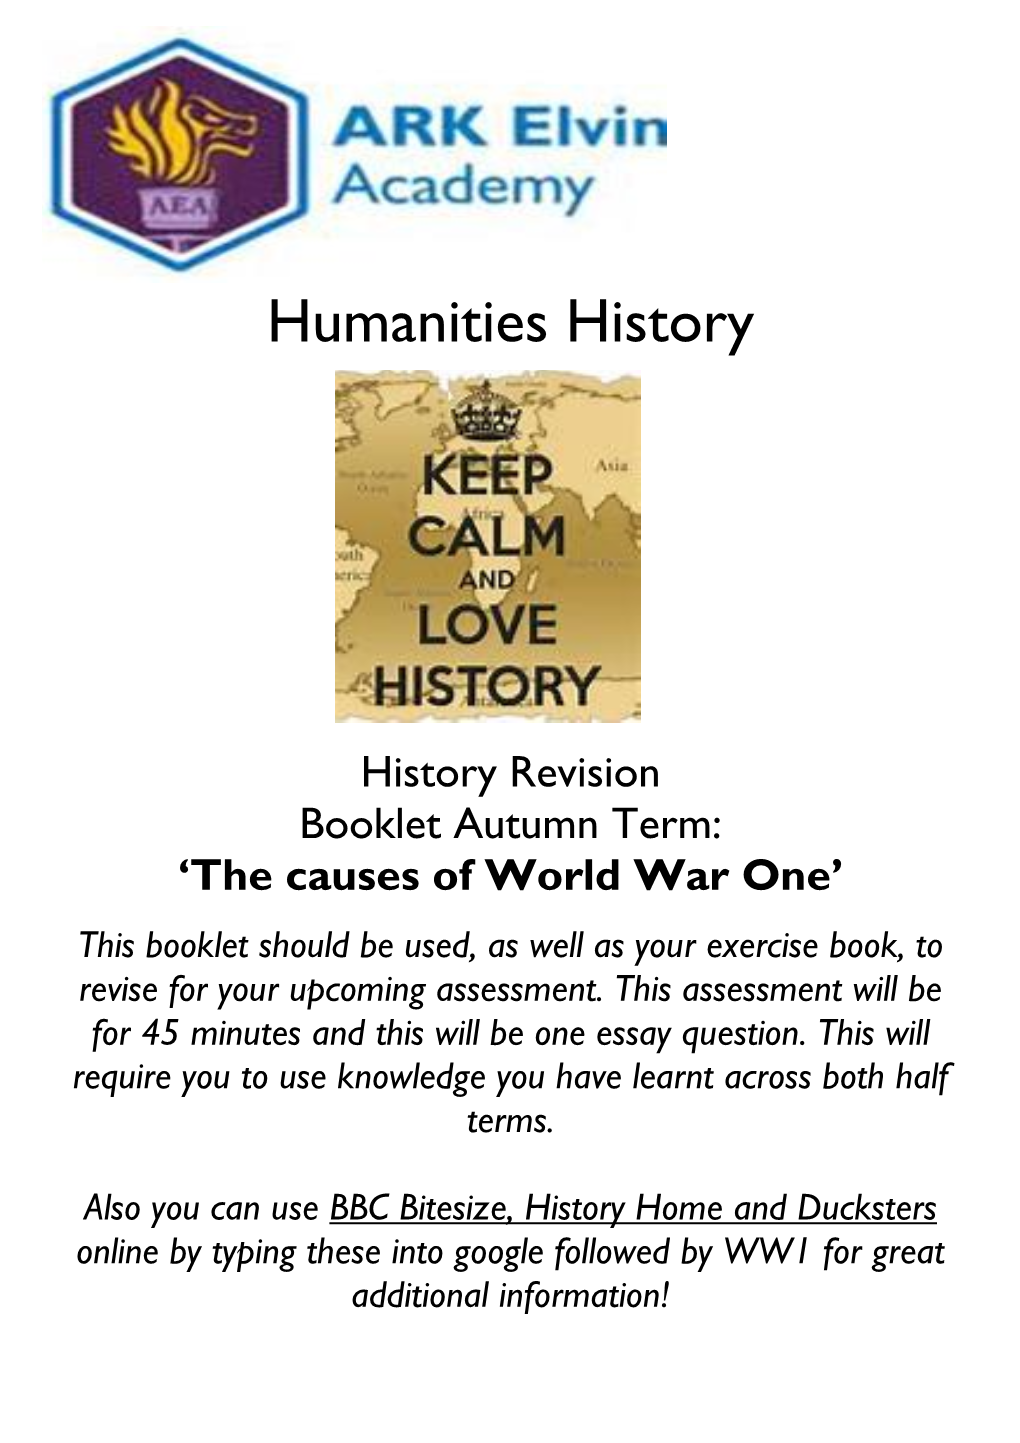 History Revision Booklet Autumn Term: 'The Causes of World War One'